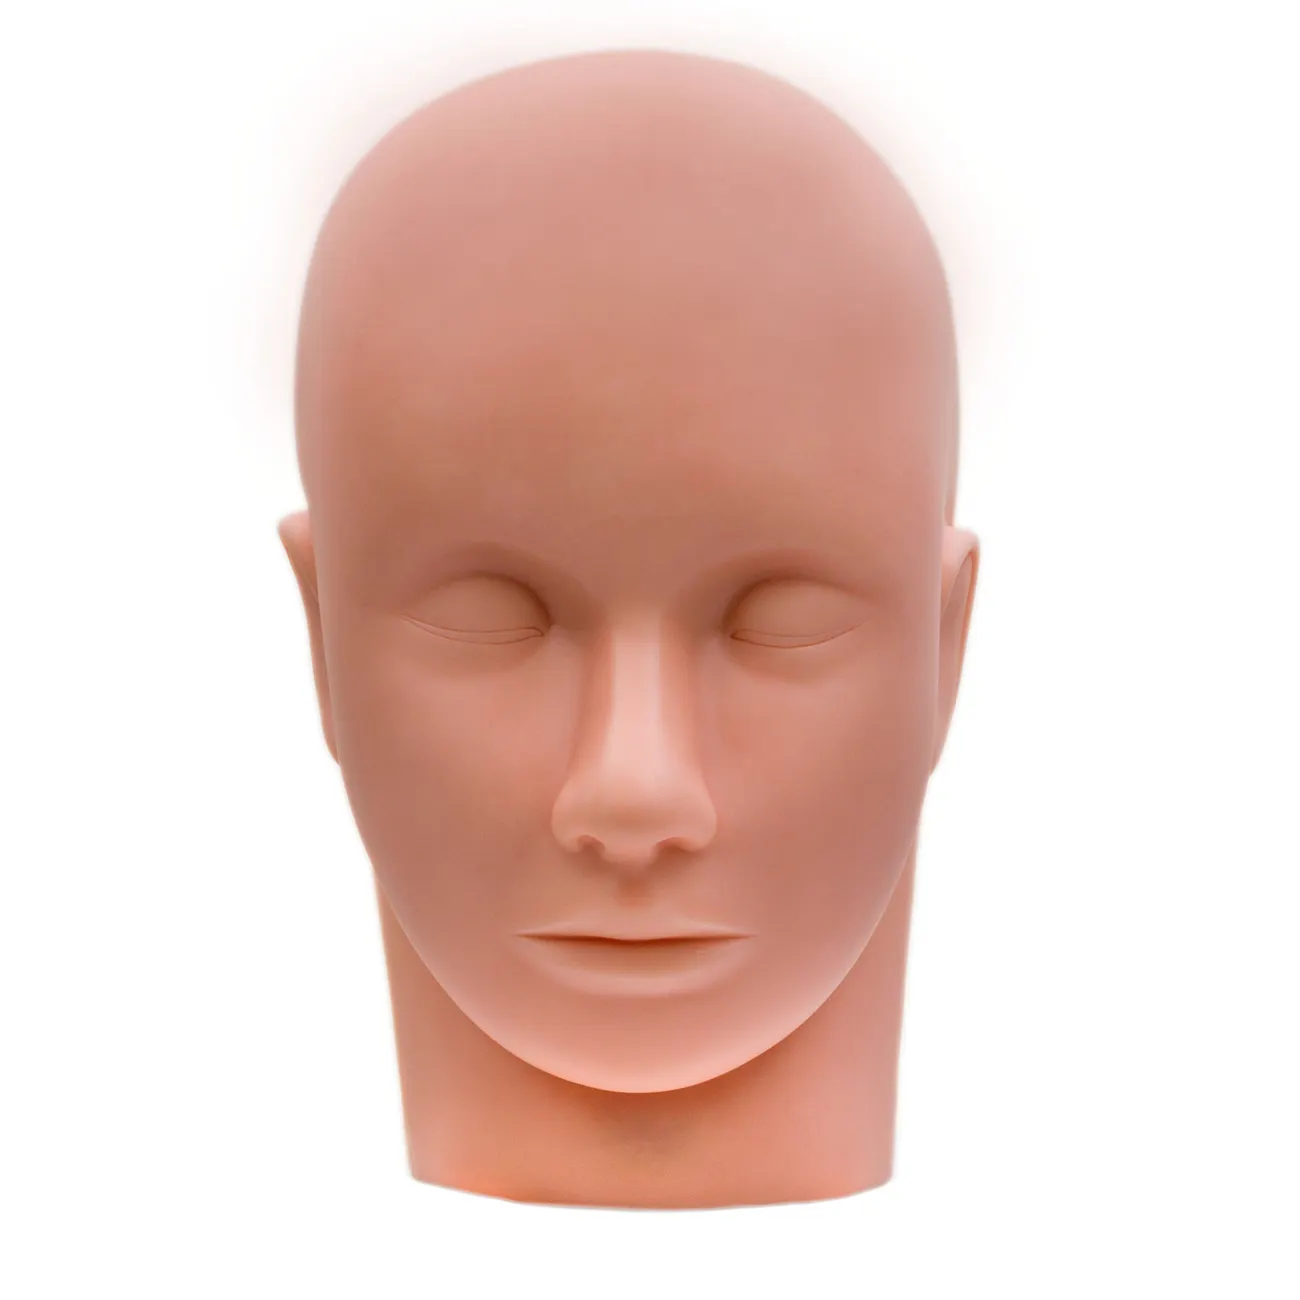 Silicone Flat Model Heads Extensions Makeup Tools Practice Lash Rubber Eyelash Extension Training Mannequin Head